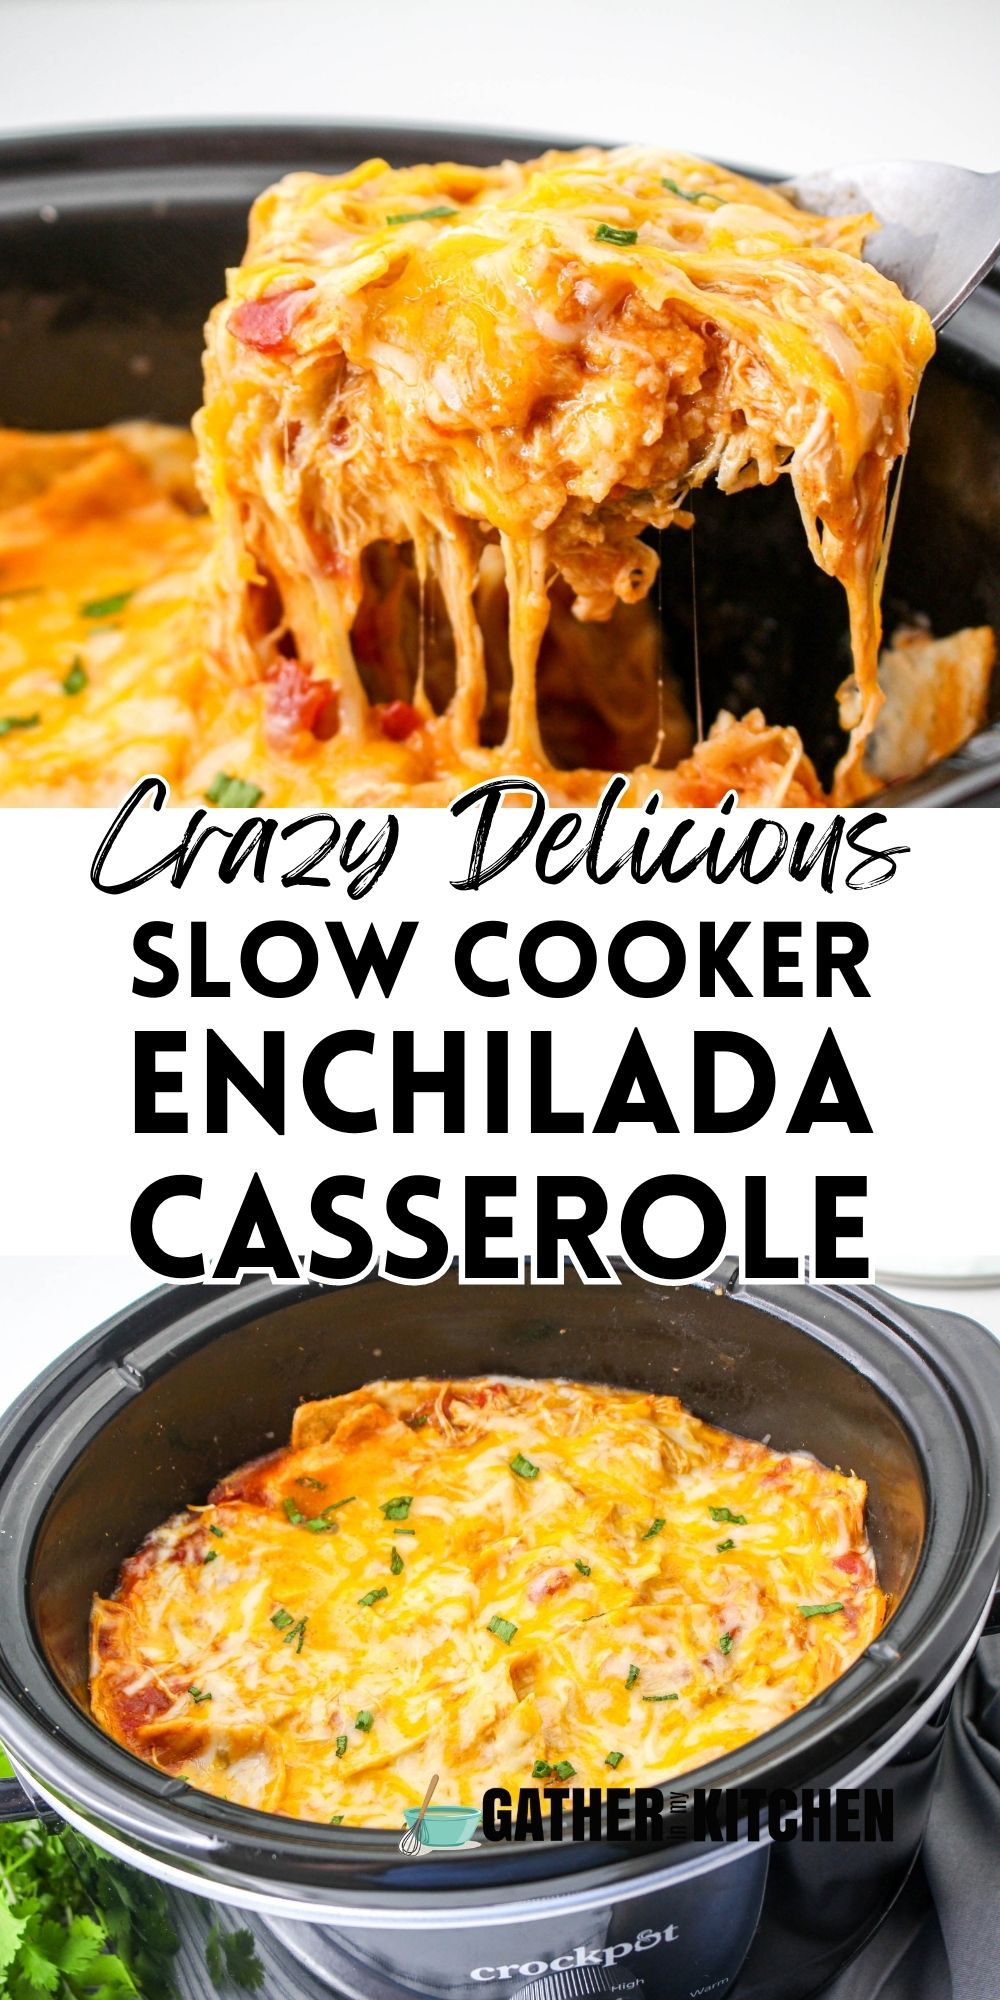 Pin image: top shows a spoonful of casserole, middle says "Crazy Delicious Slow Cooker Enchilada Casserole" and bottom is a casserole in a slow cooker.